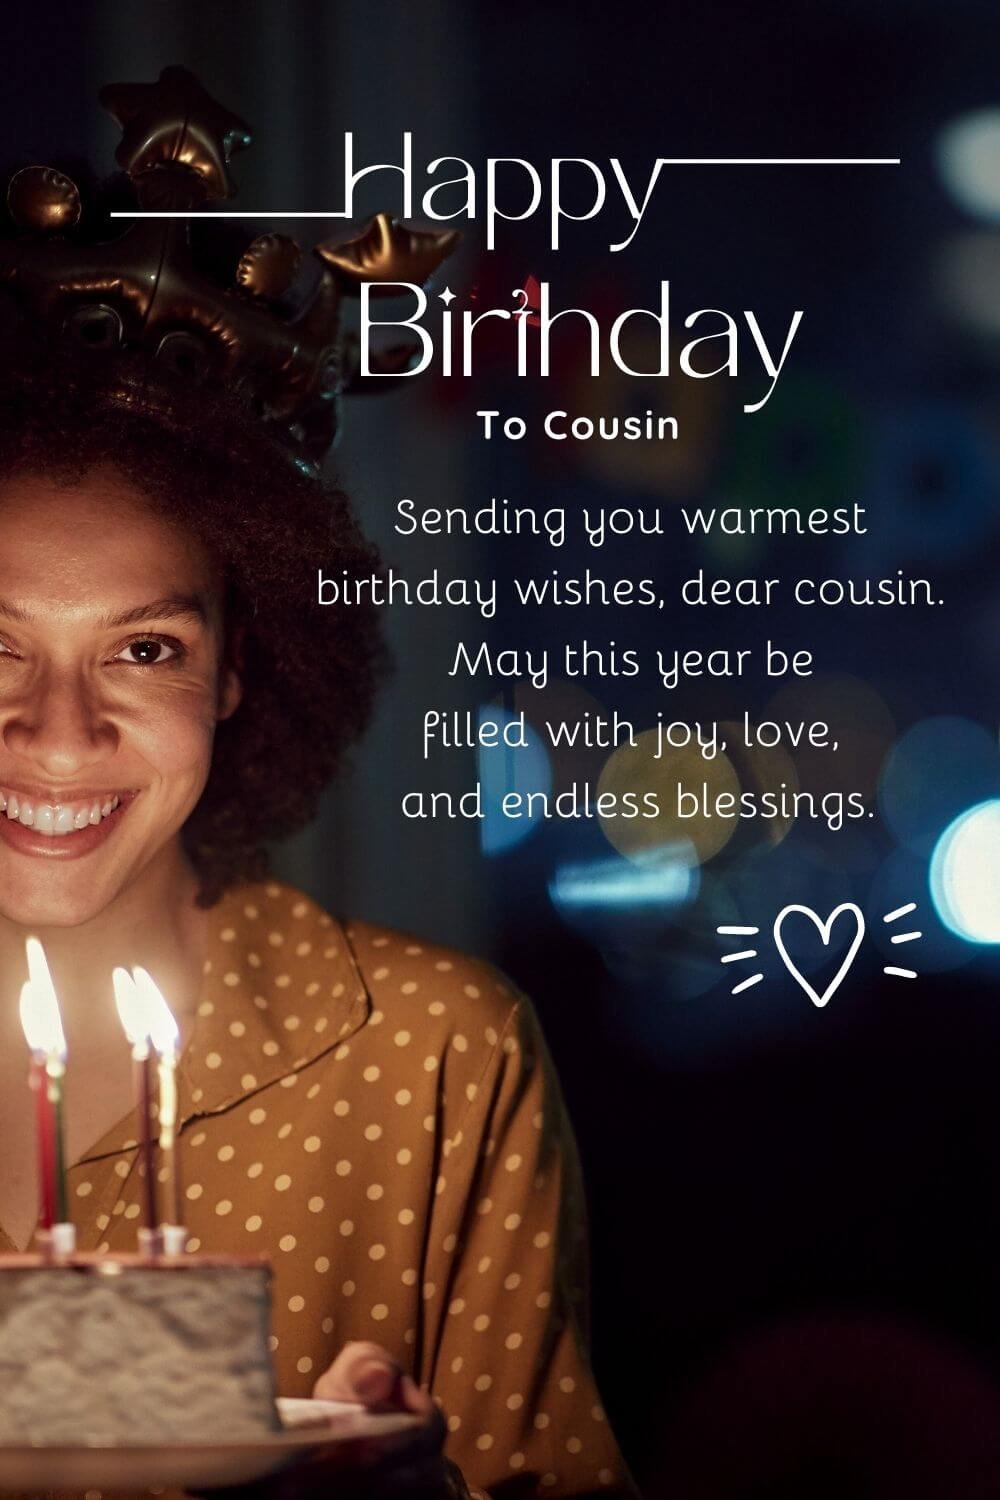 female cousin birthday wish photo collection